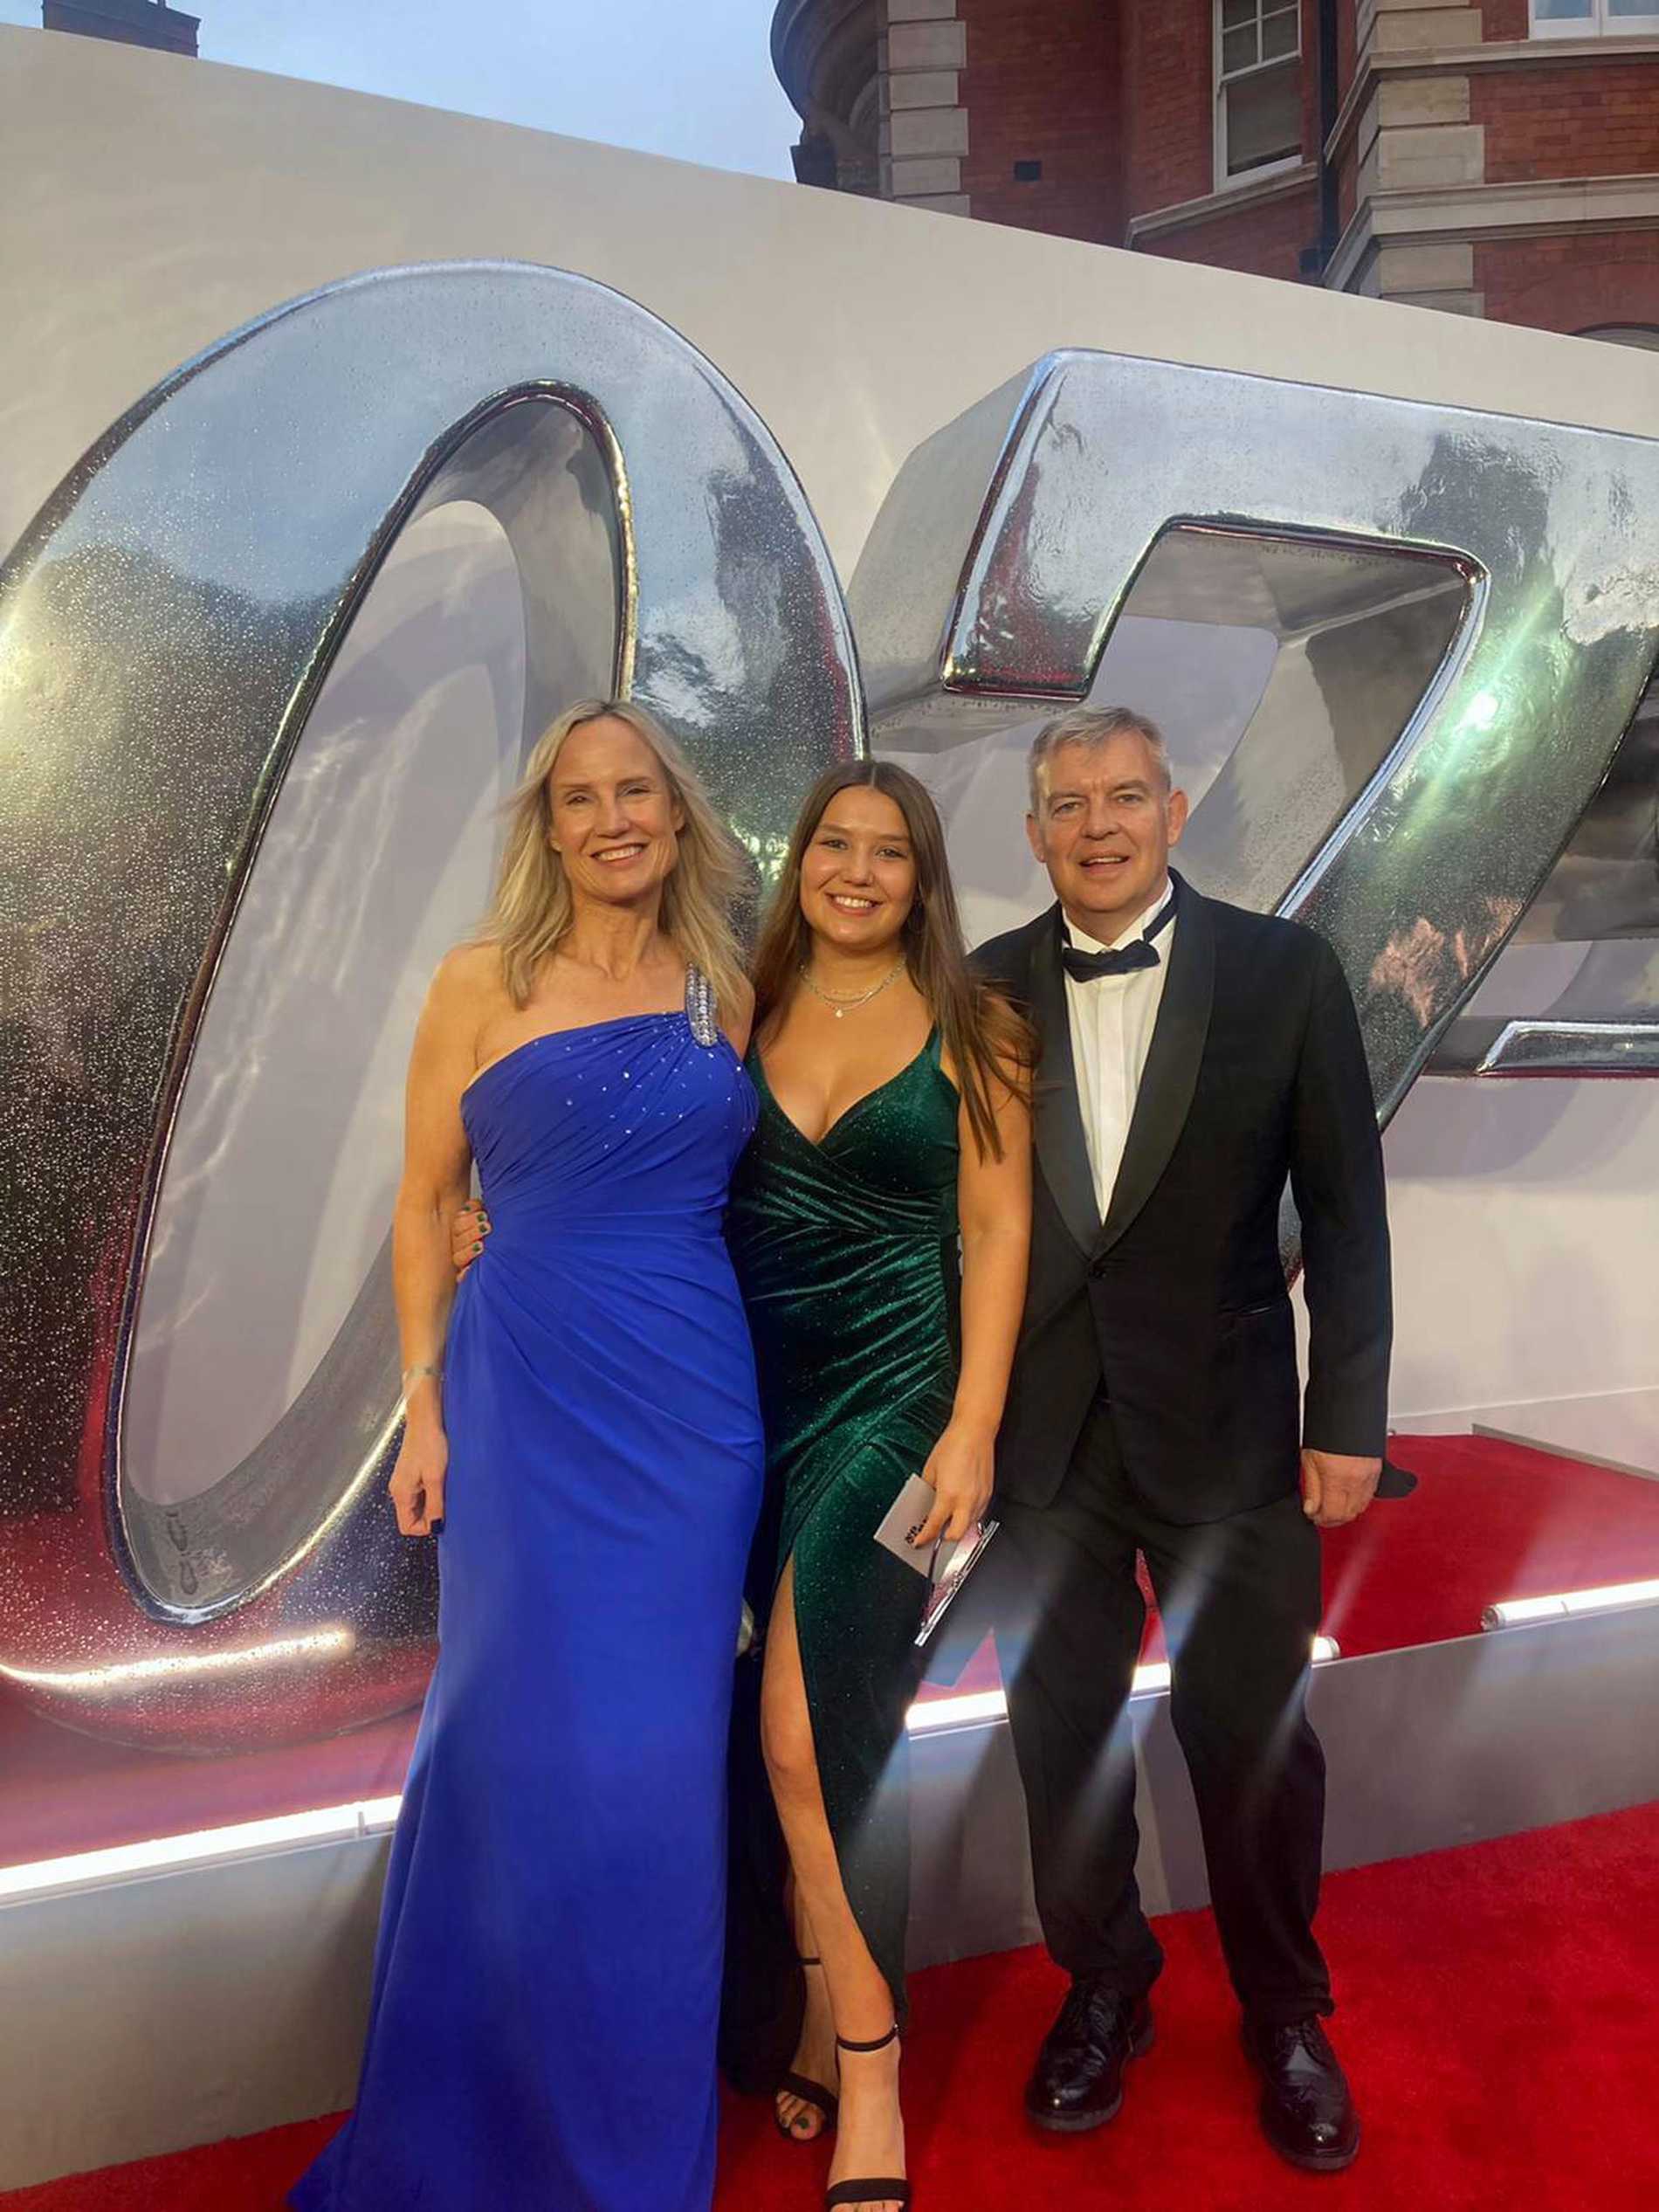 Chloe and her parents posing on the red carpet, in front of a large silver 007.